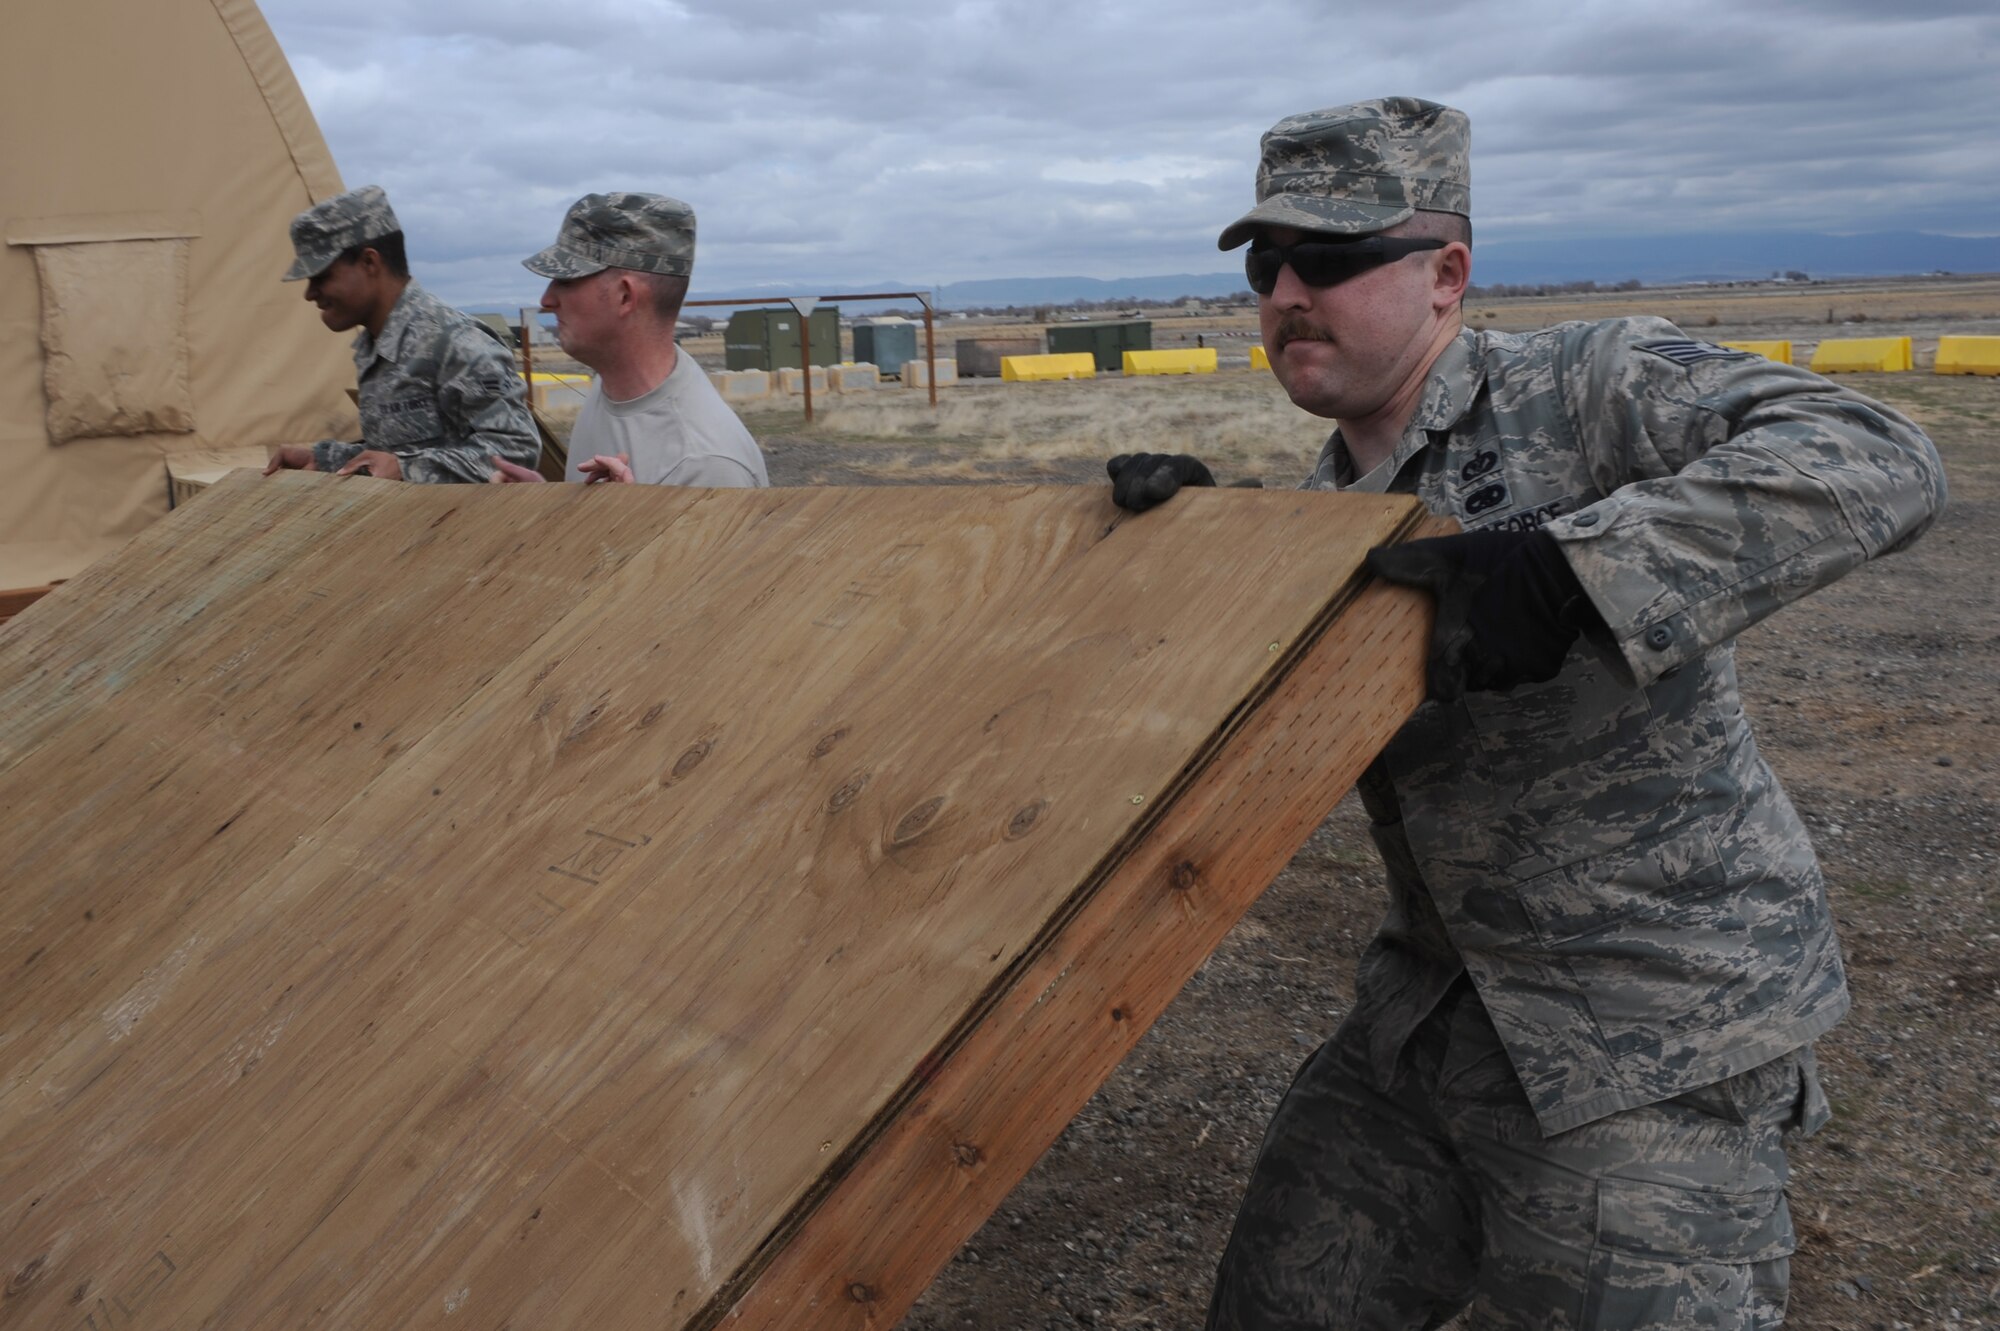 U.S. Air Force Airman 1st Class Nathan Coleman, Staff Sgt. Chris Carpenter and Staff Sgt. Kyle McCloskey, 366th Civil Engineer Squadron structures technicians, put in place a revetment wall at a simulated deployed location, Mountain Home Air Force Base, Idaho, April 1, 2013. Revetments are essential in protecting base assets and personnel down range. (U.S. Air Force photo/Staff Sgt. Roy Lynch) (Released)